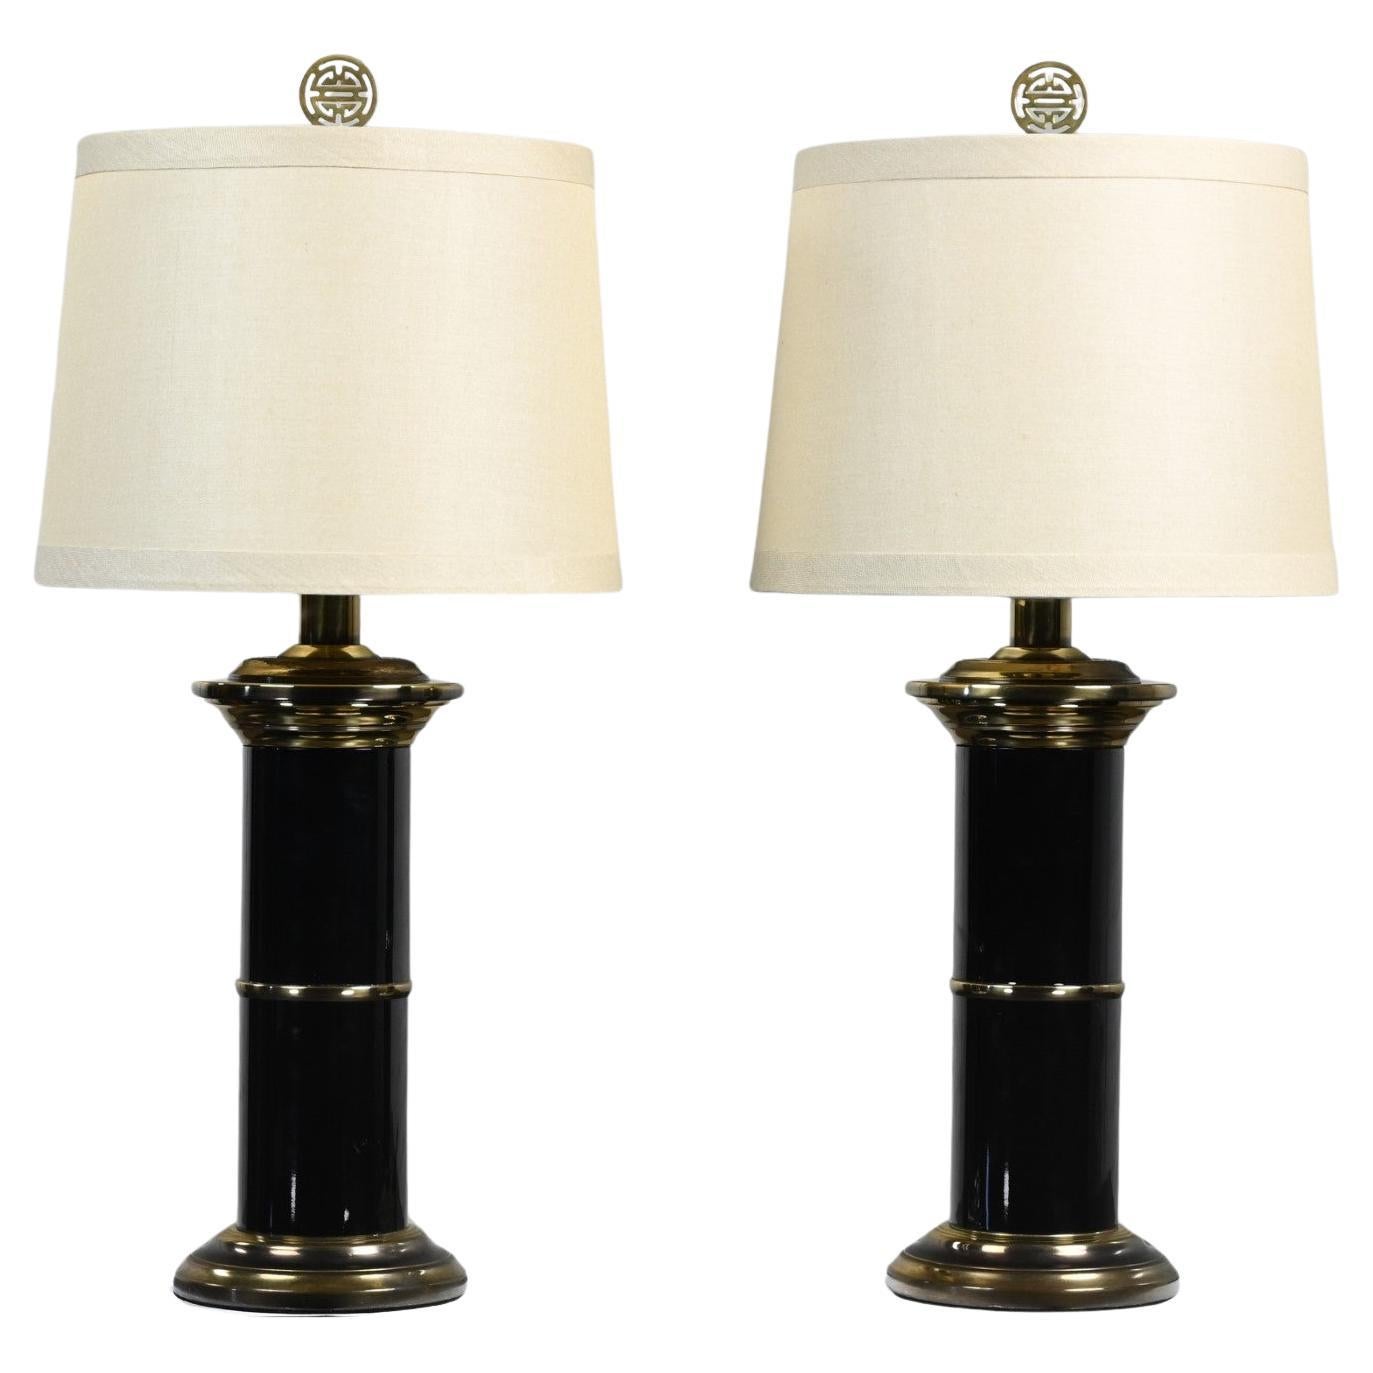 Hollywood Regency Black & Brass Plated Column Table Lamps Asian Finials a Pair